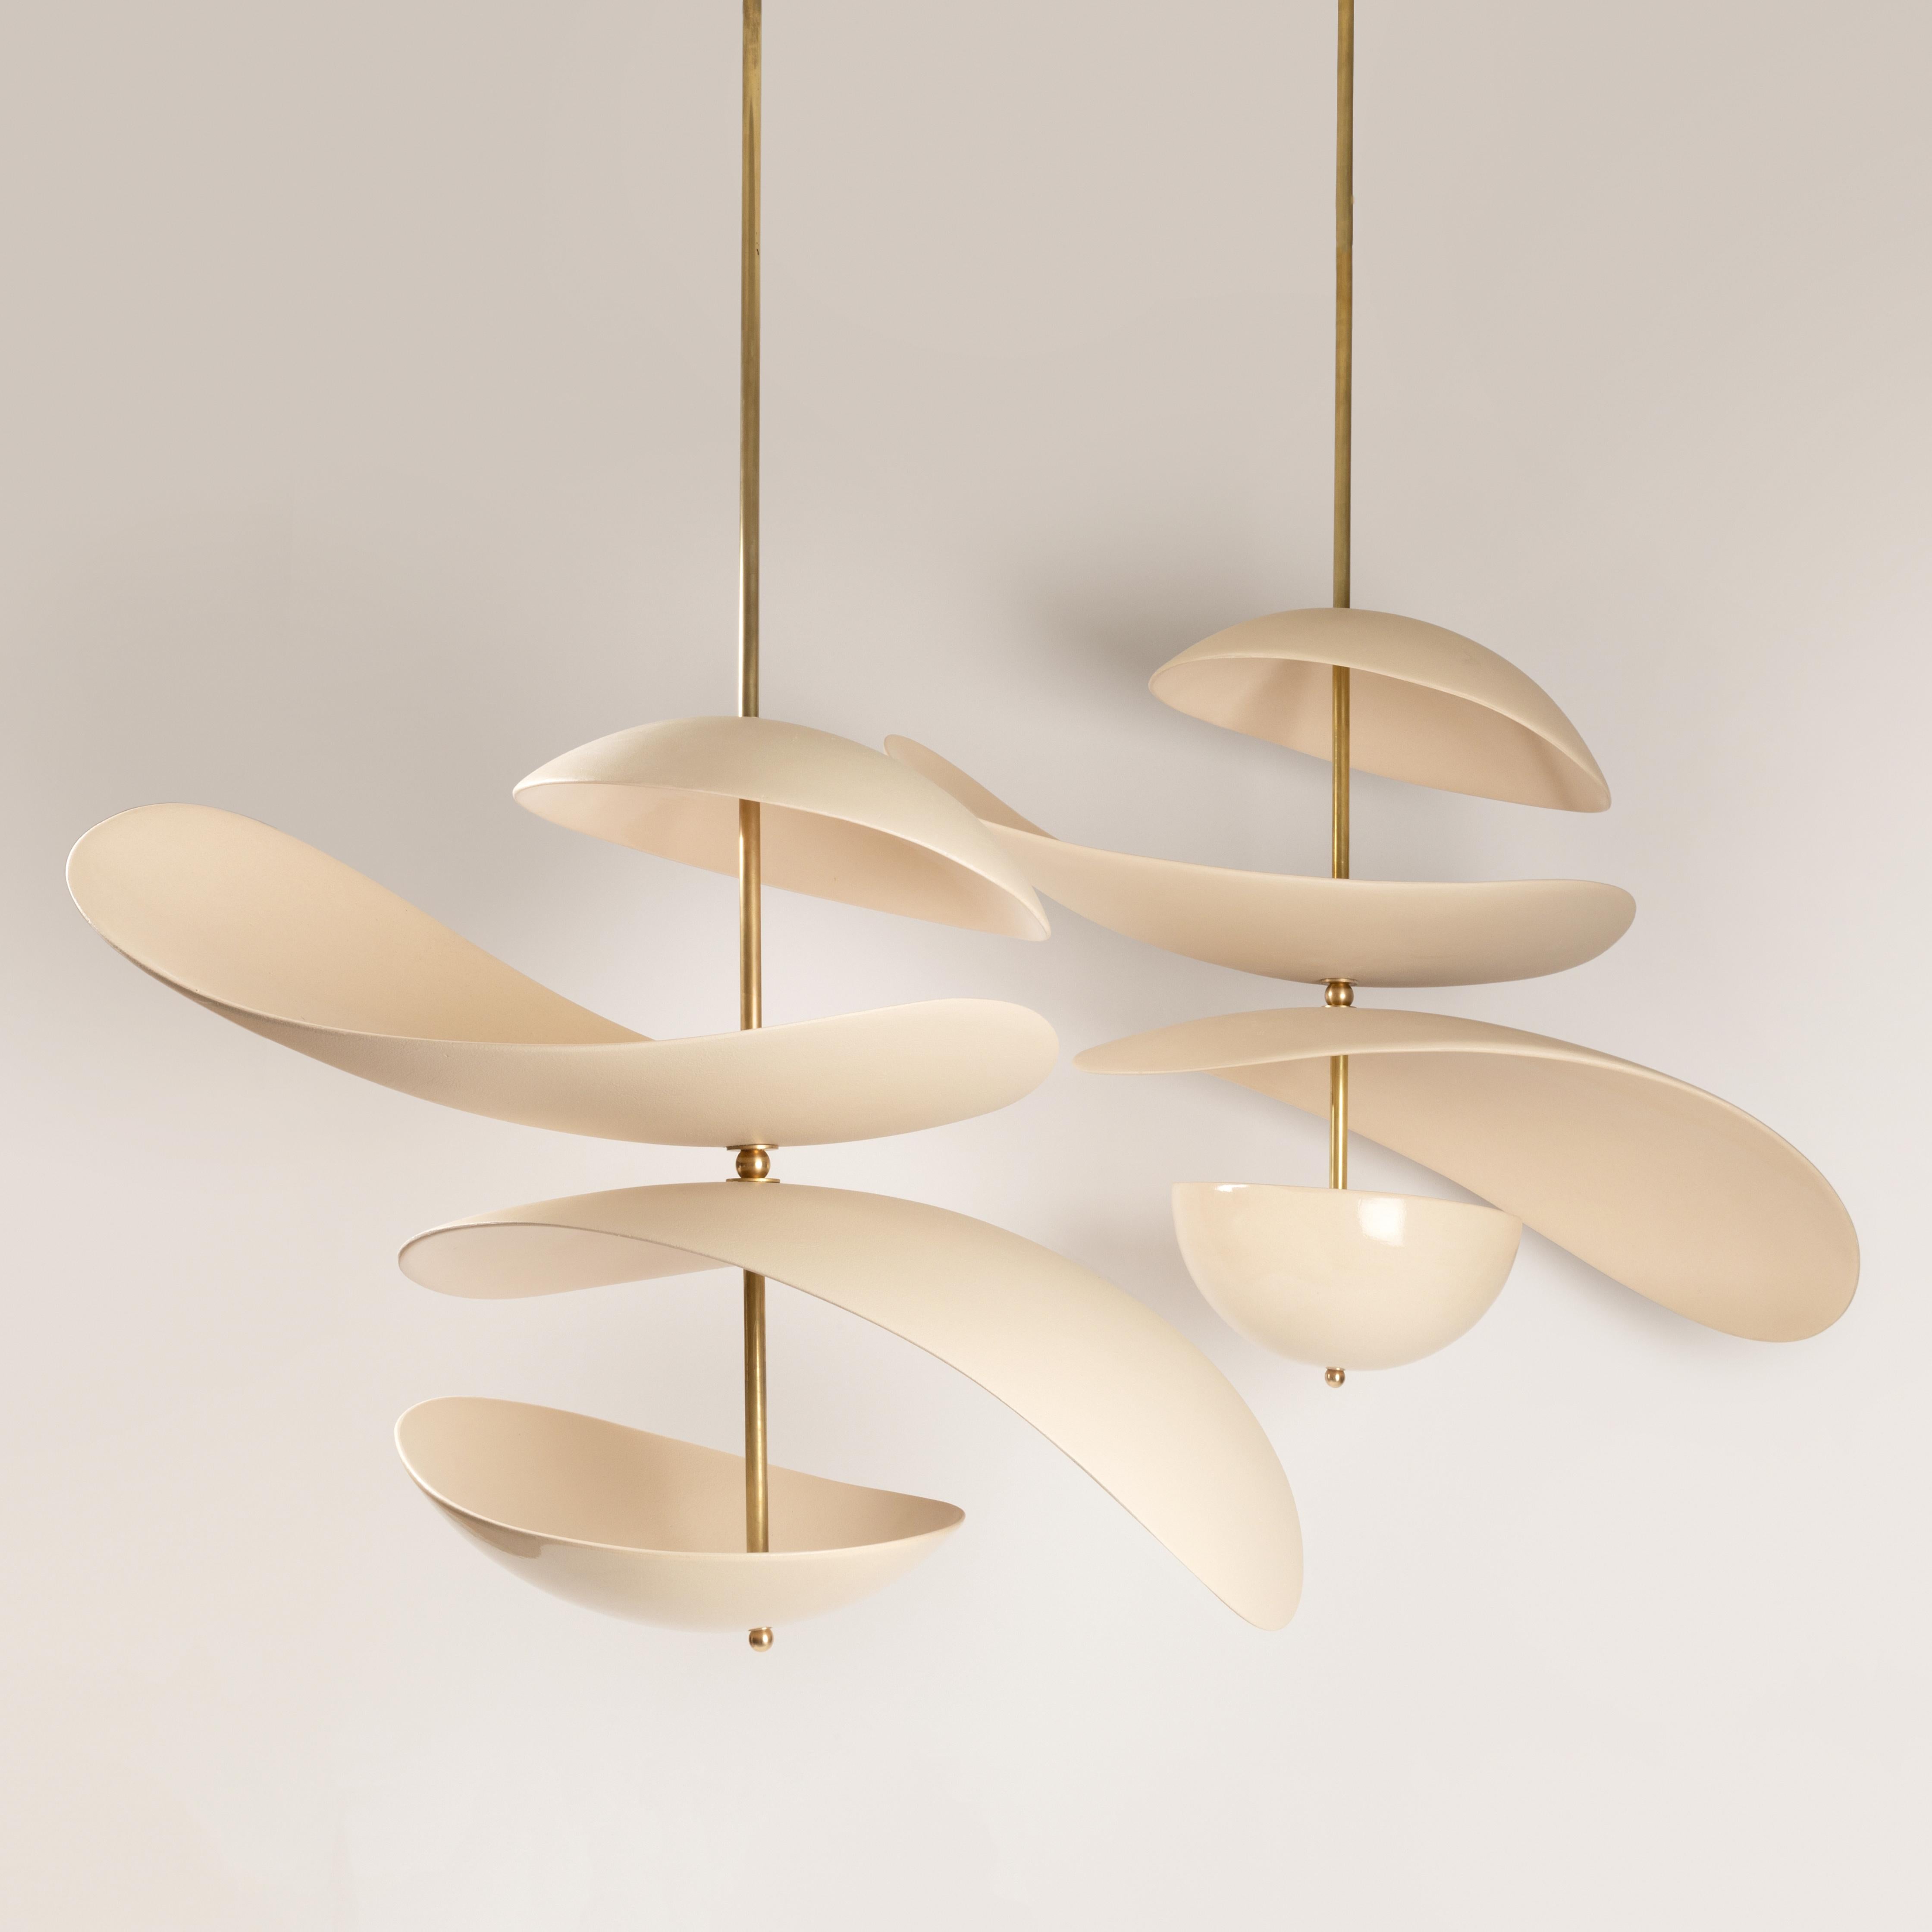 Set of 2 Petal Pendants by Elsa Foulon
Dimensions: D 75 x H 50 cm 
Materials: Ceramic, Brass
Unique Piece
Also available in different options: Bowl or Cup (lower part).

All our lamps can be wired according to each country. If sold to the USA it